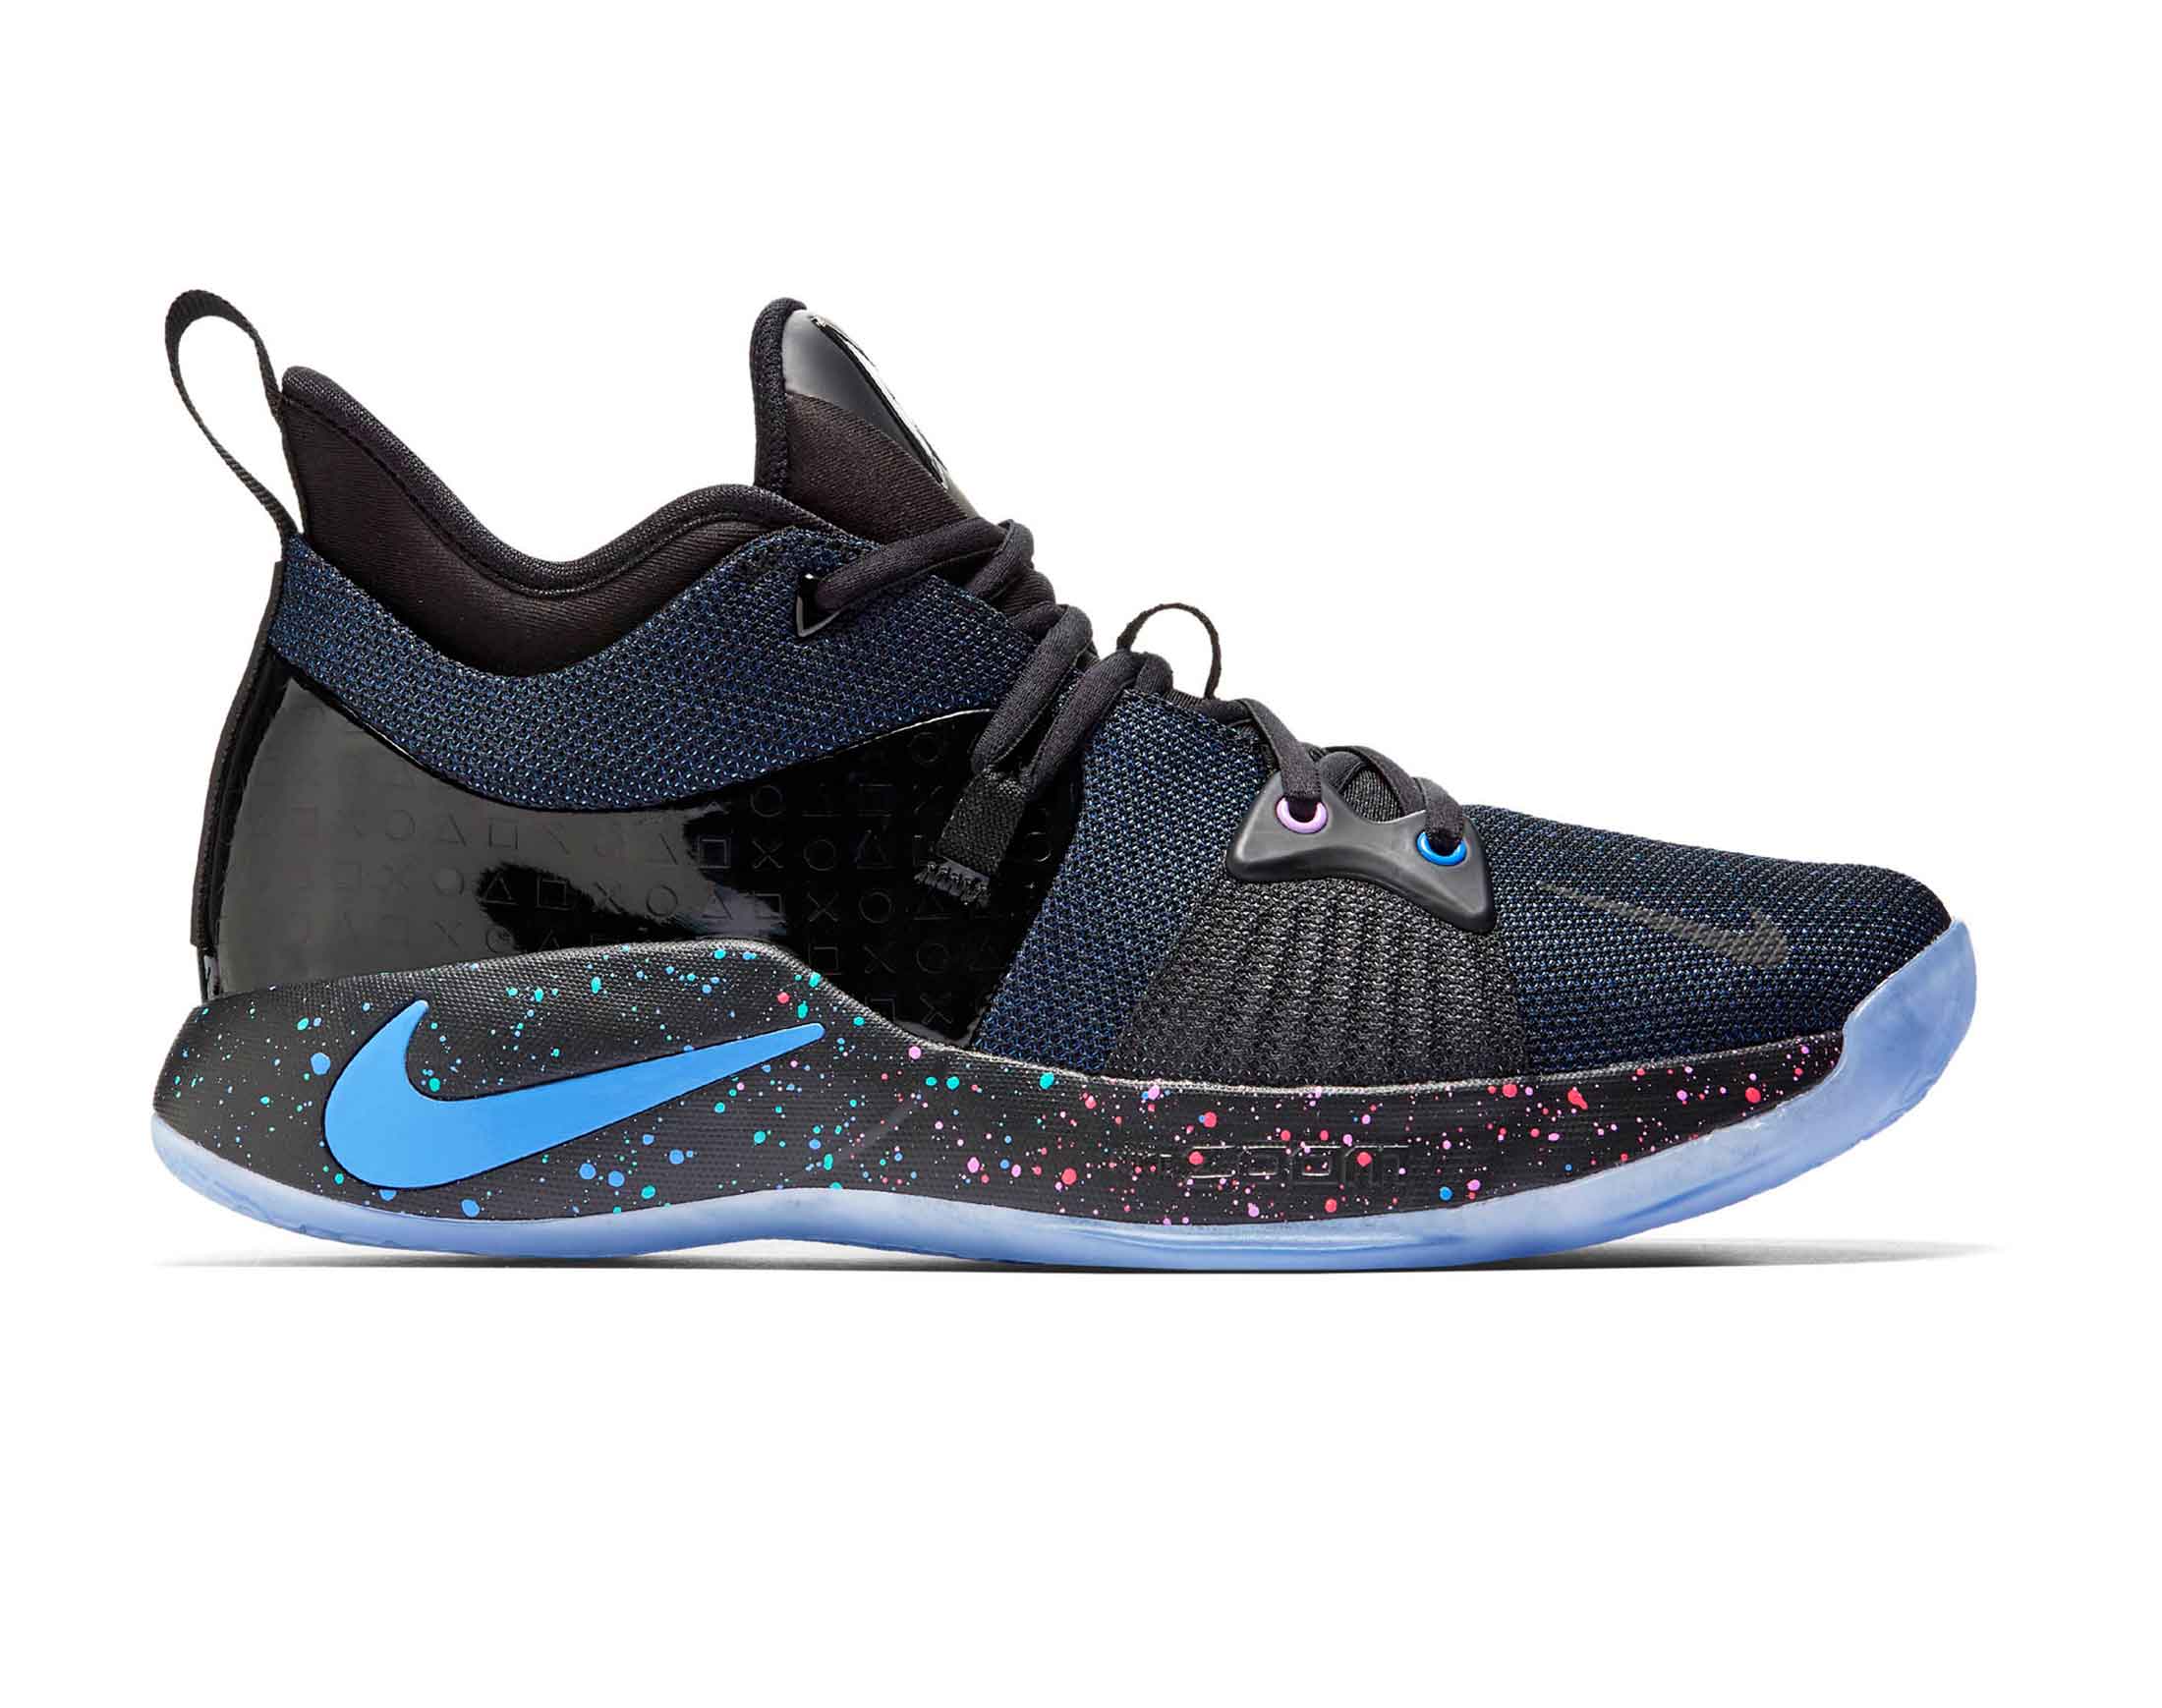 Nike's Limited Edition Sneaker, the PG2, Vibrates on Your Feet - Bloomberg